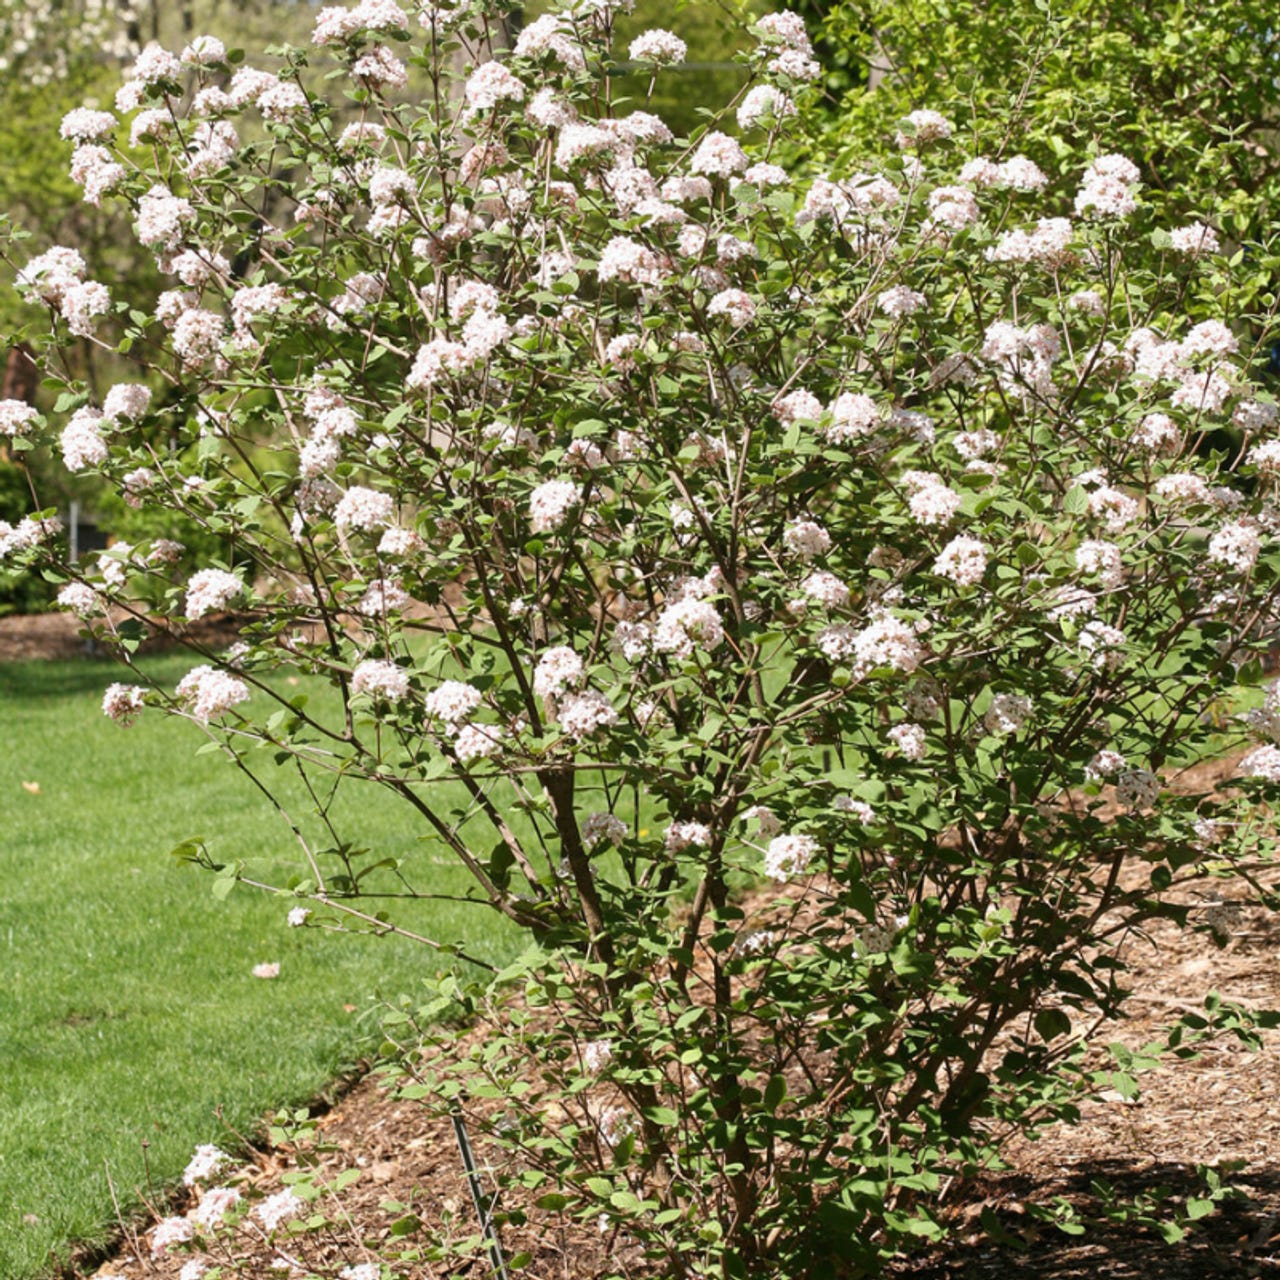 white flowers on a viburnum bush with spindly branches in front of a green lawn